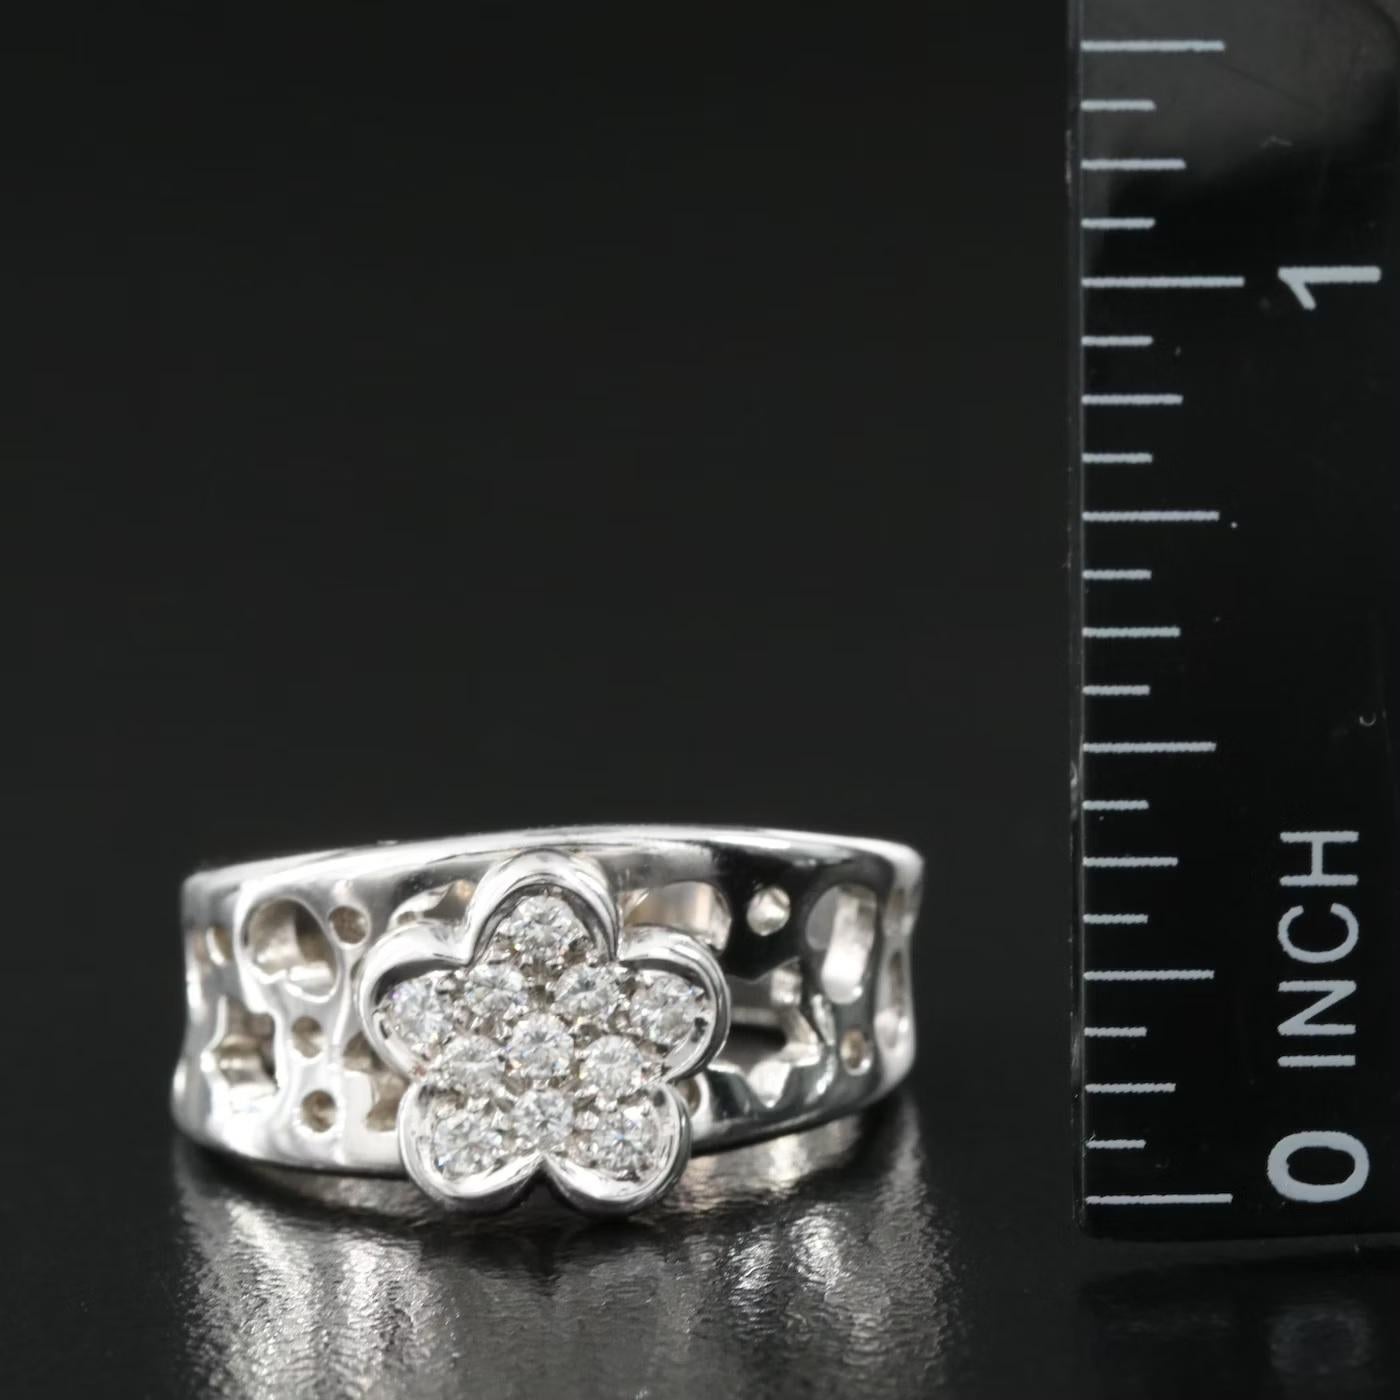 Round Cut $9750 / NEW / PASQUALE BRUNI - ITALY designer Flower Diamond Ring / 18K Gold For Sale